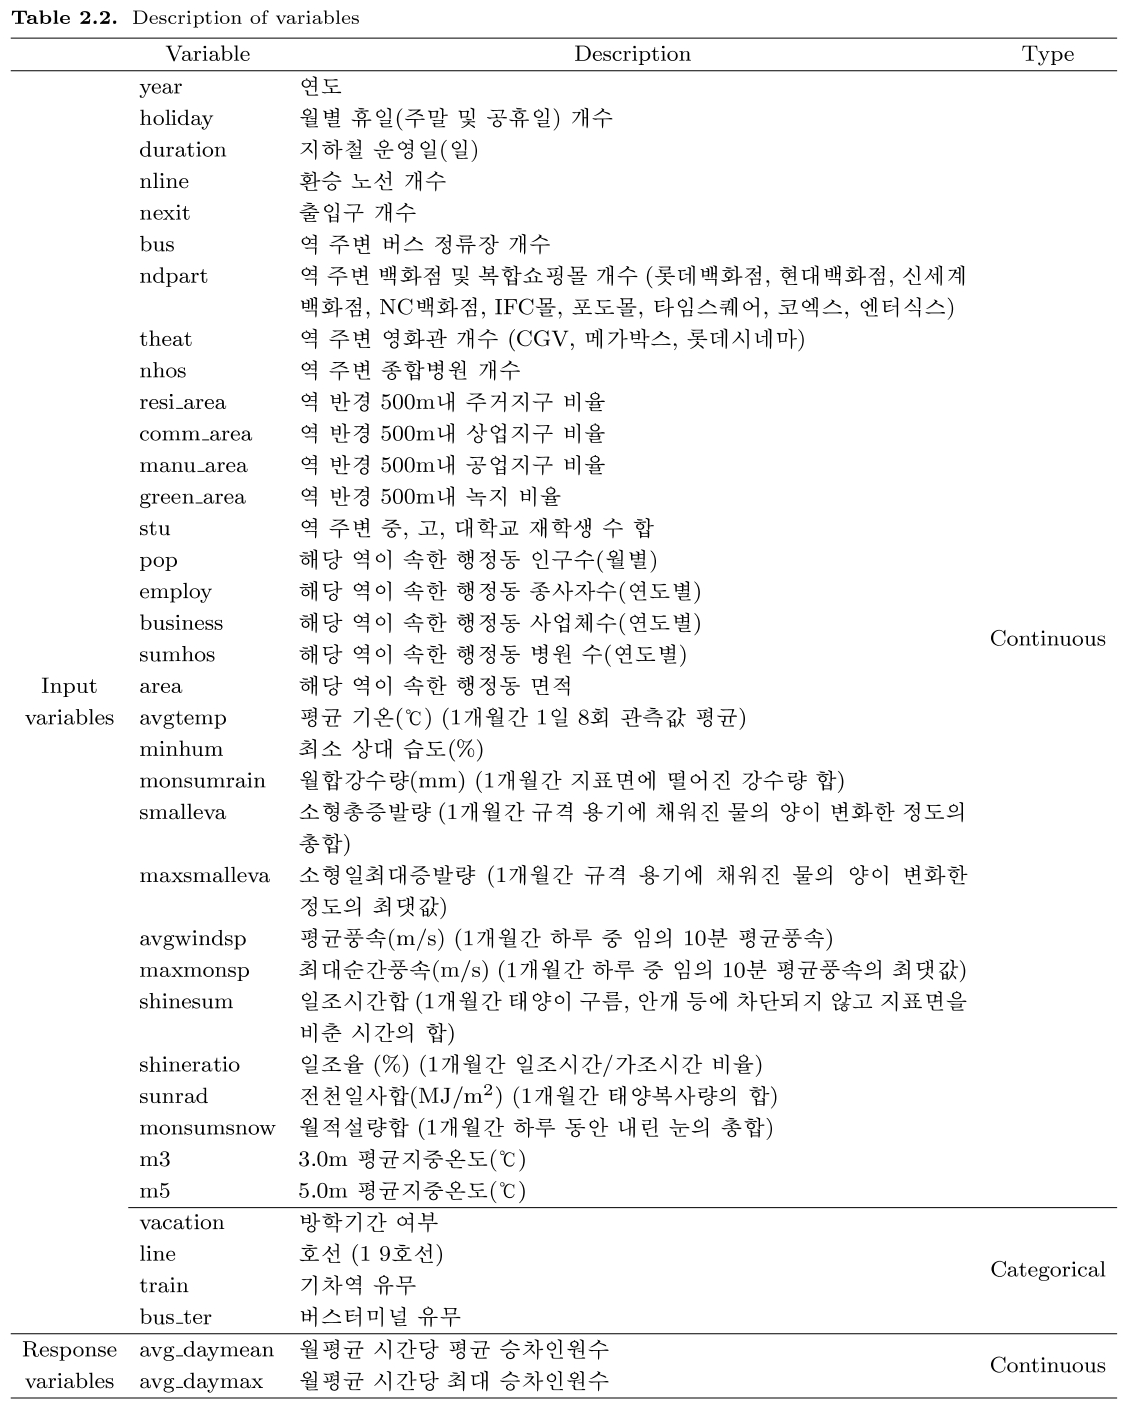 GCGHDE_2019_v32n1_111_t0002.png 이미지